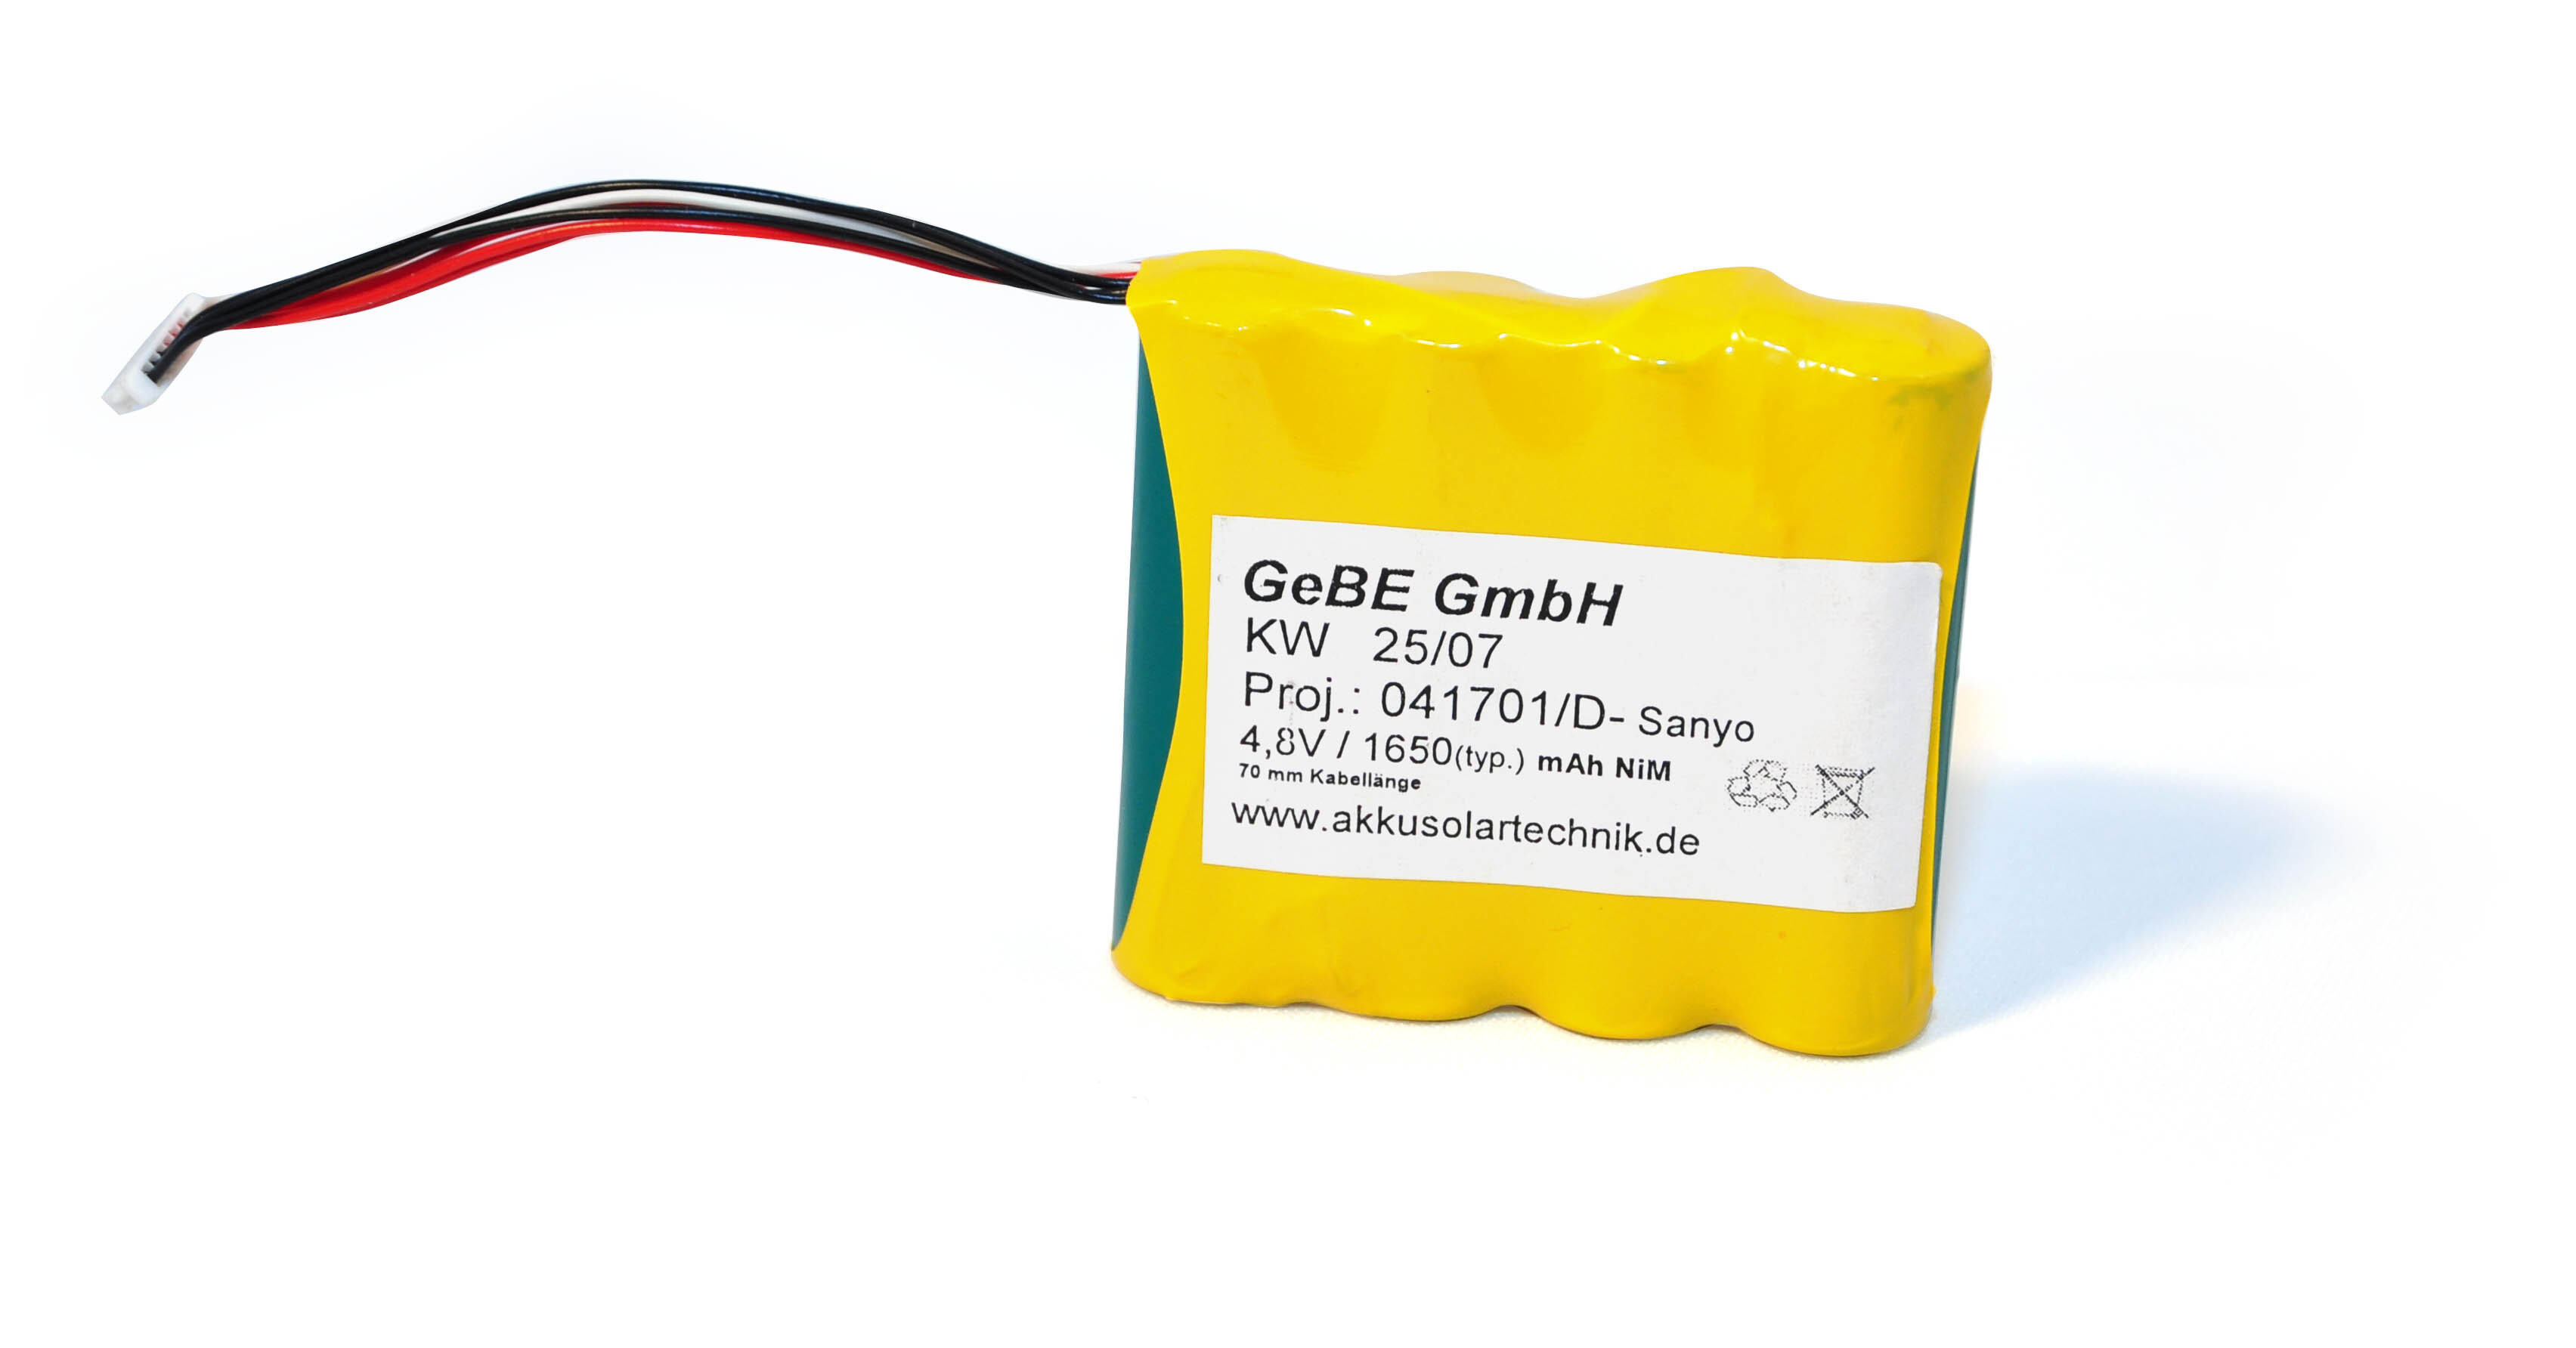 Rechargeable battery pack for thermal printer IR 58 mm
4,8 V, 1650 mAh NiMH